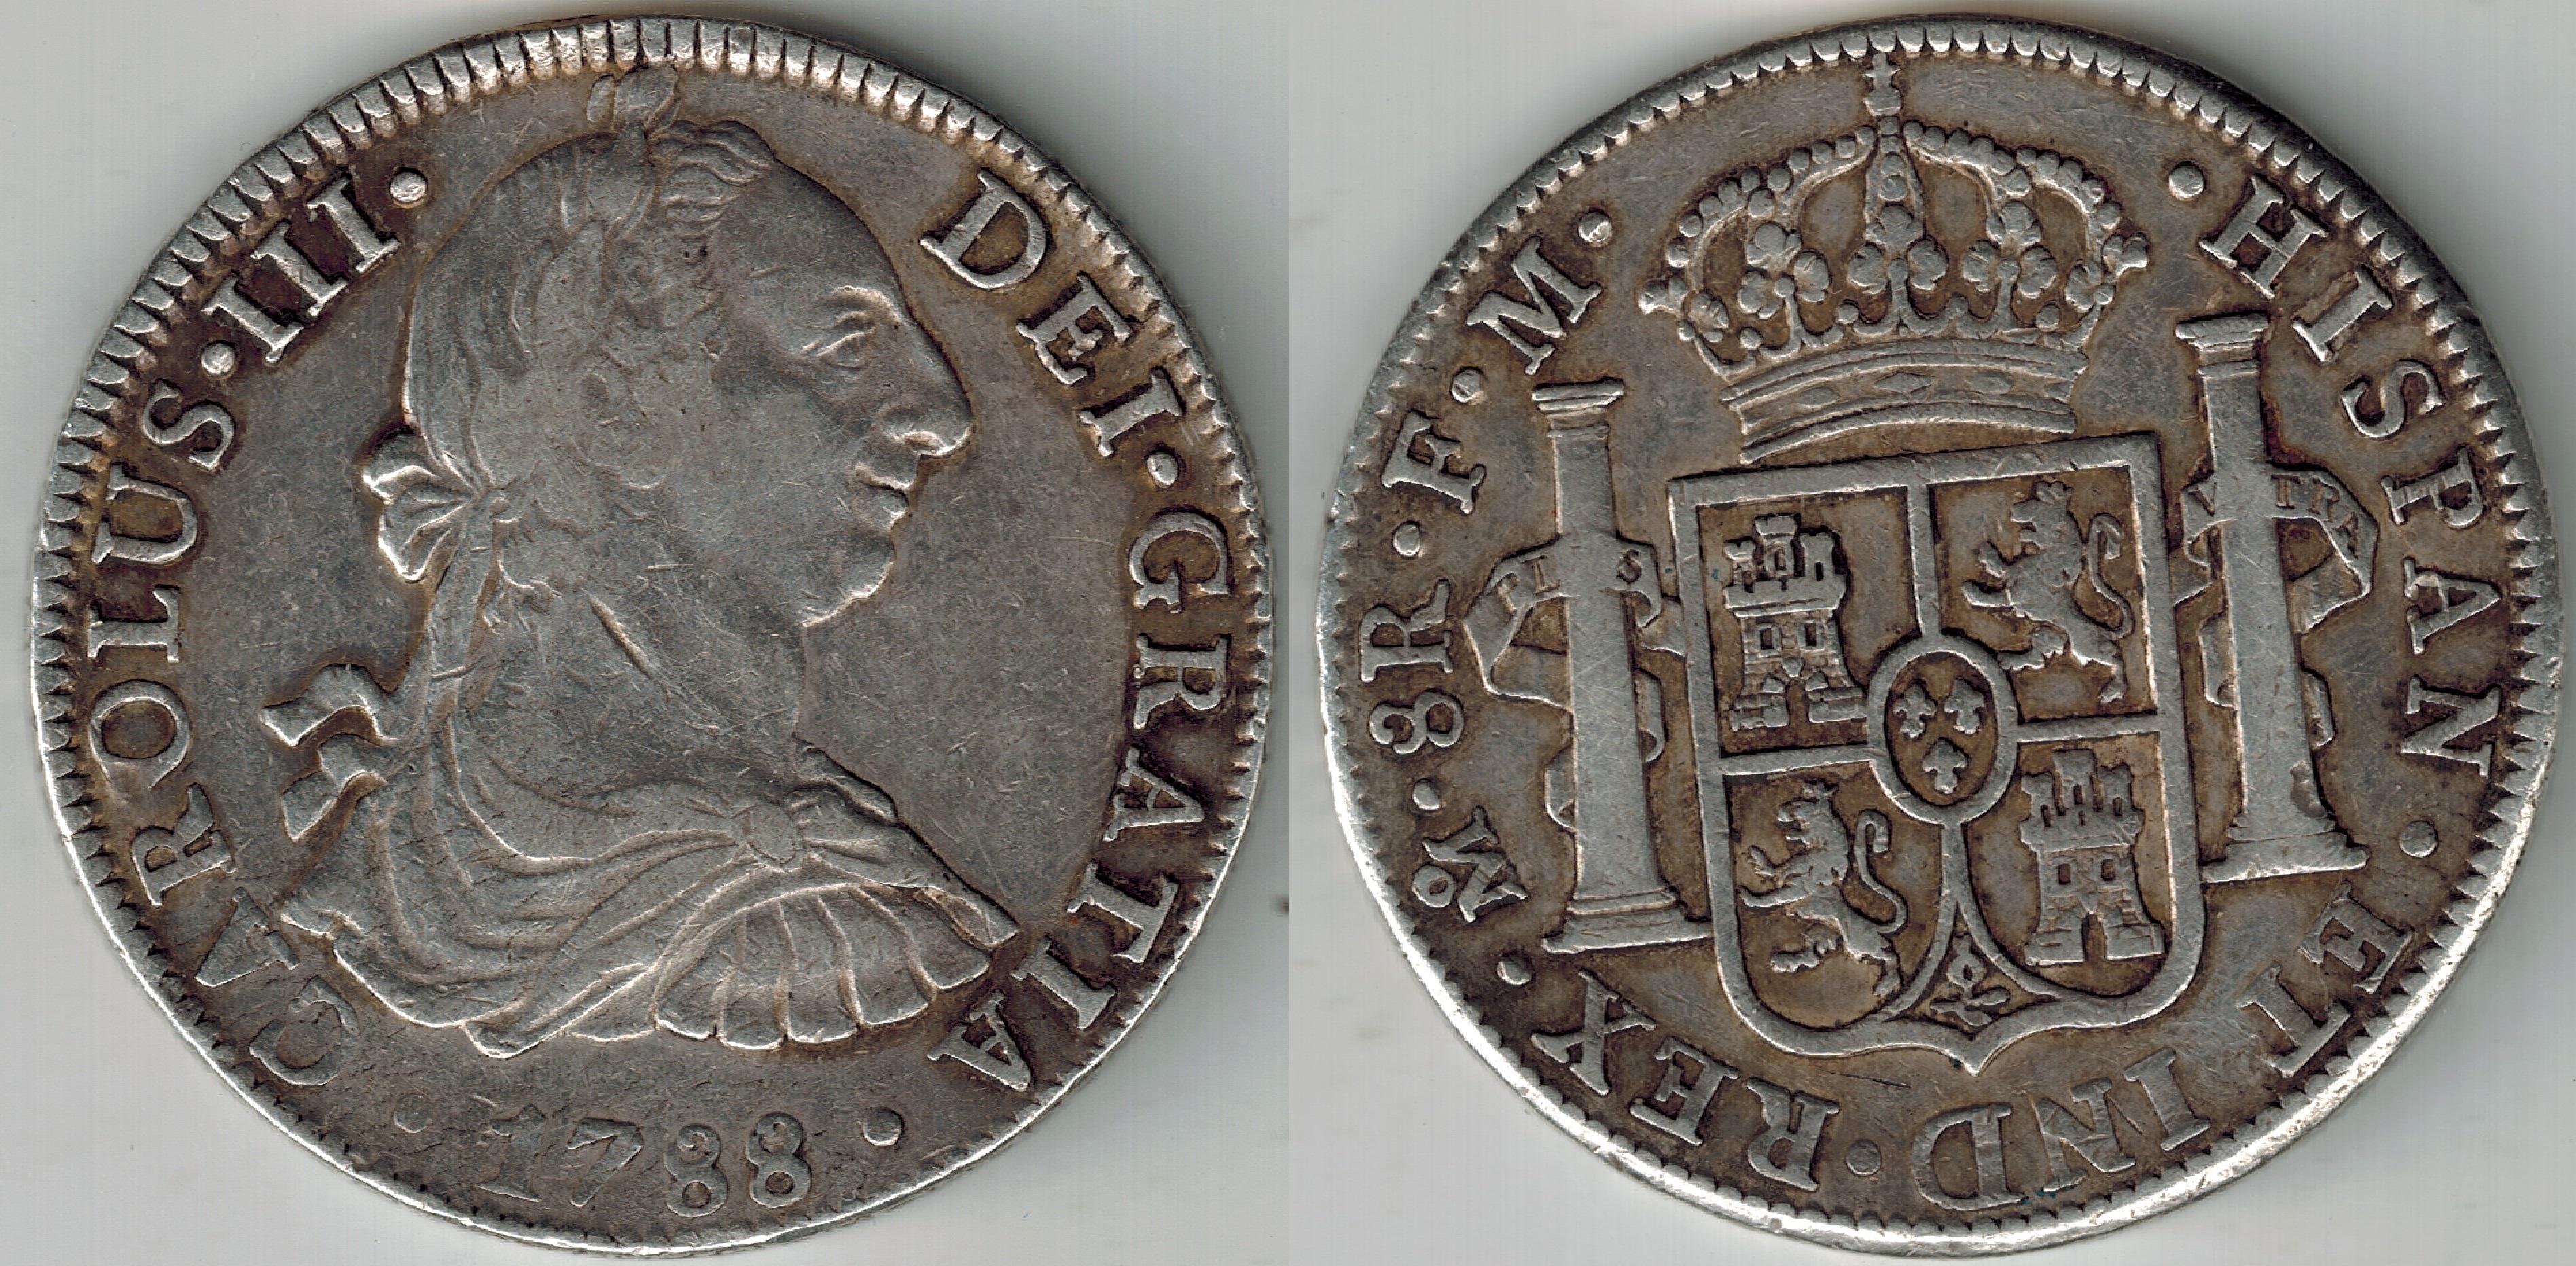 8 Reales New Spain (Mexico mint) 1788, King Carlos III (Charles III) of Spain. LARGE 3.9CM, 27G, 90.27% SILVER.jpeg